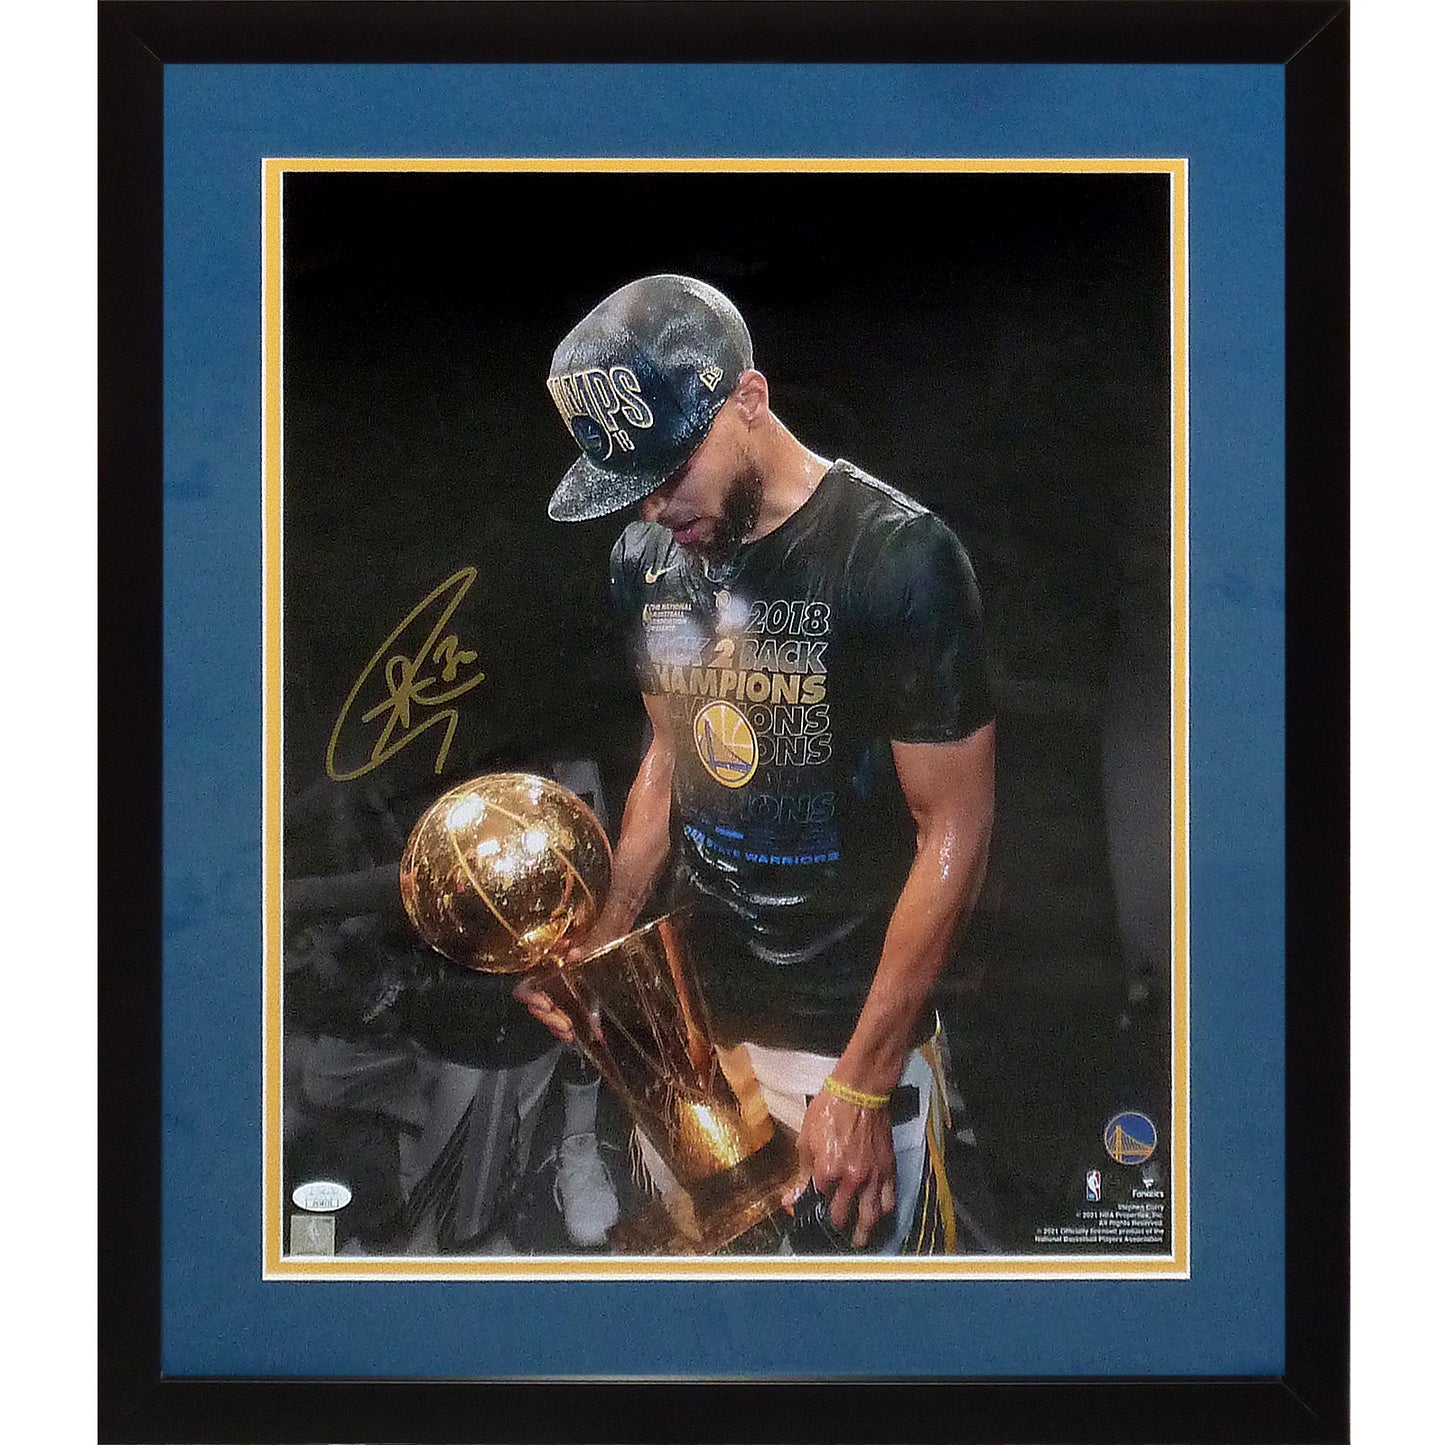 Stephen Curry Autographed Golden State Warriors (NBA Finals Trophy) Deluxe Framed 16x20 Photo - JSA